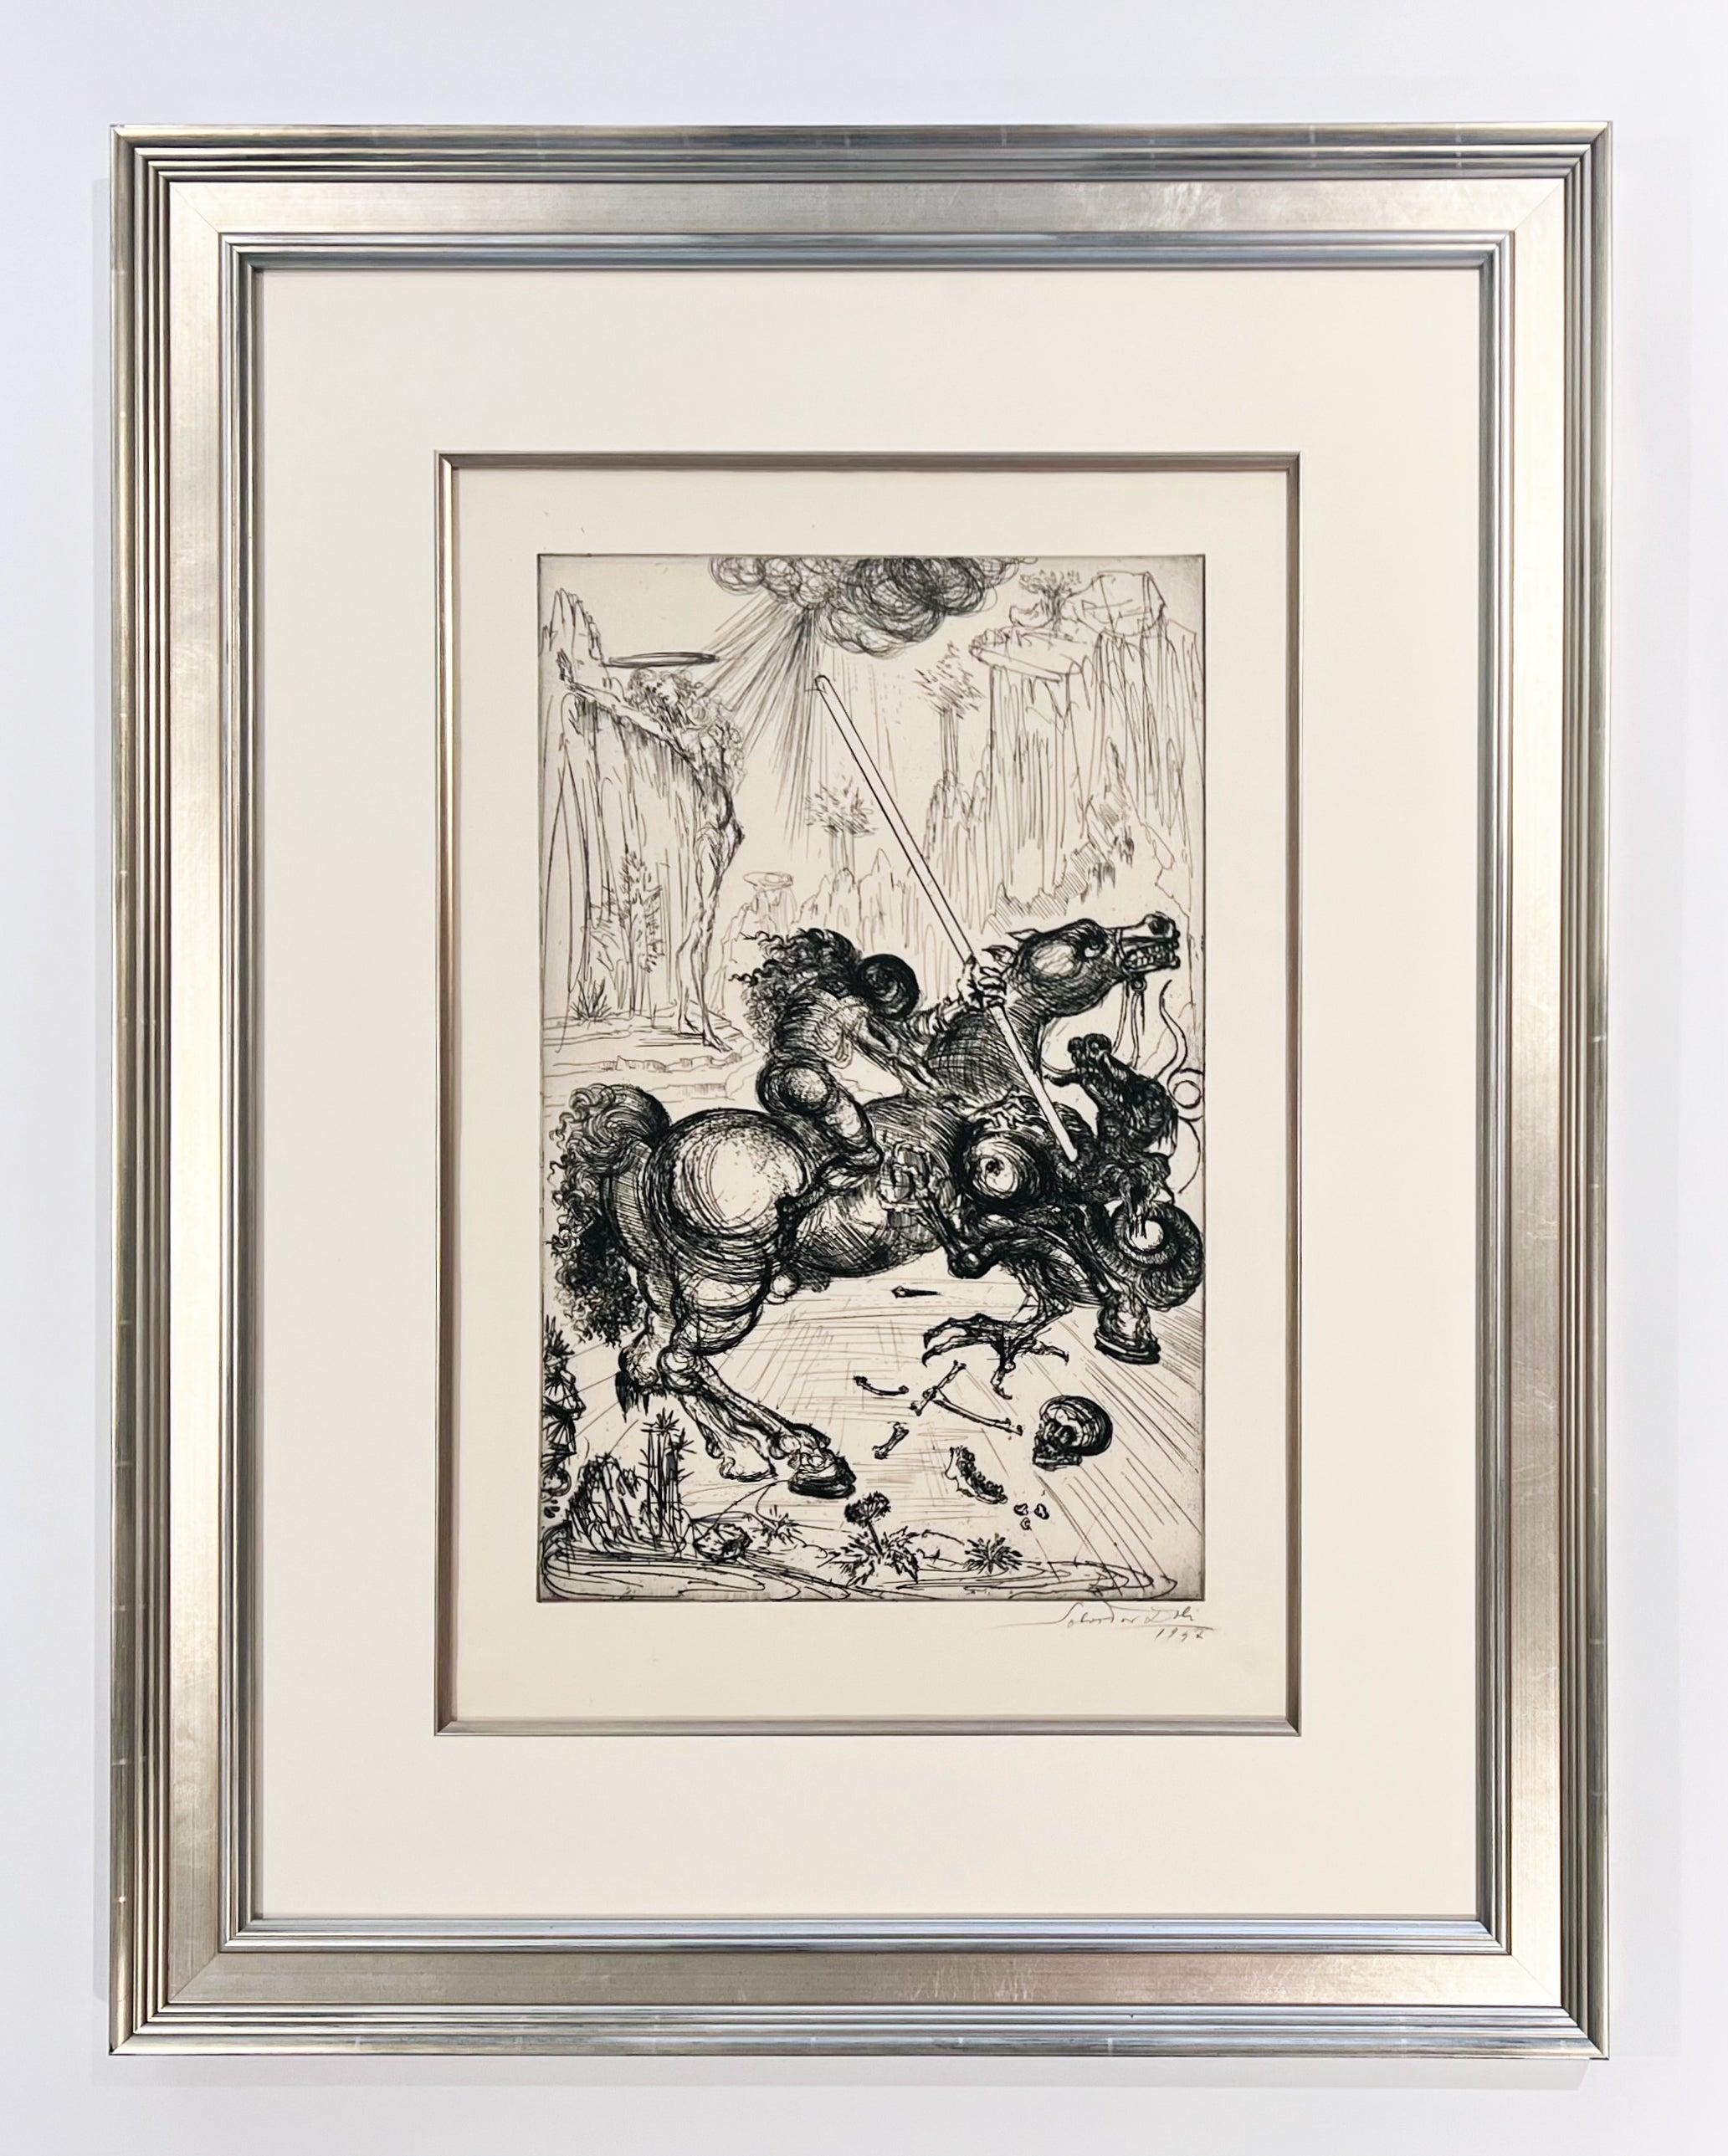 St. George and the Dragon - Print by Salvador Dalí